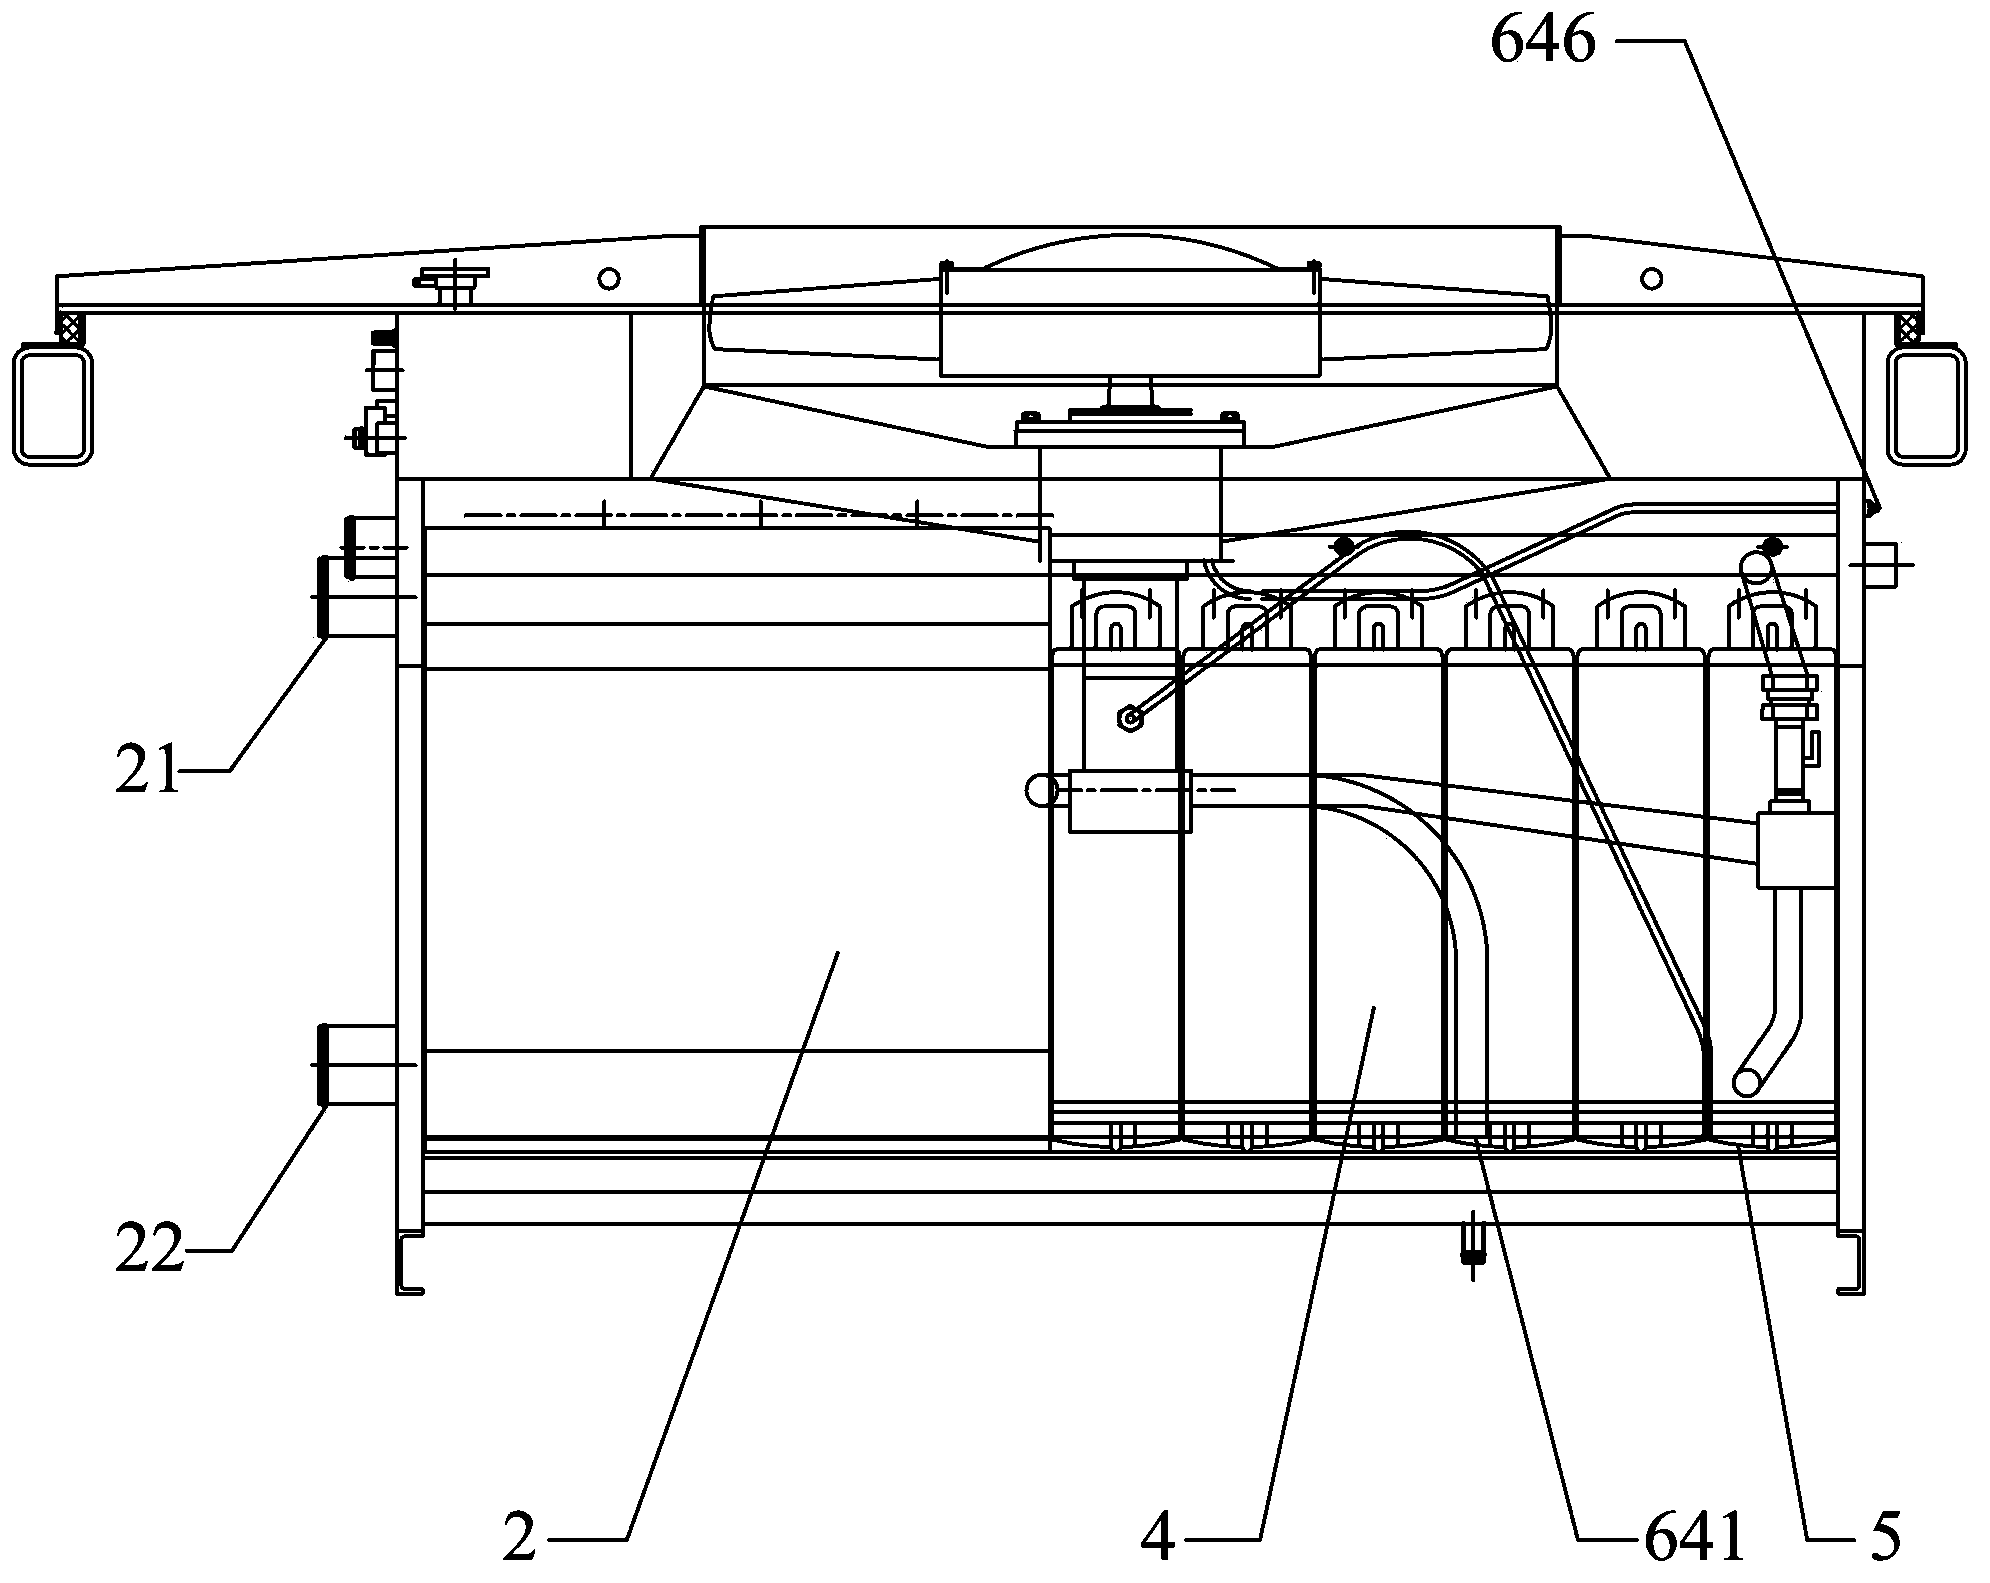 Modularized cooling device for internal combustion locomotive